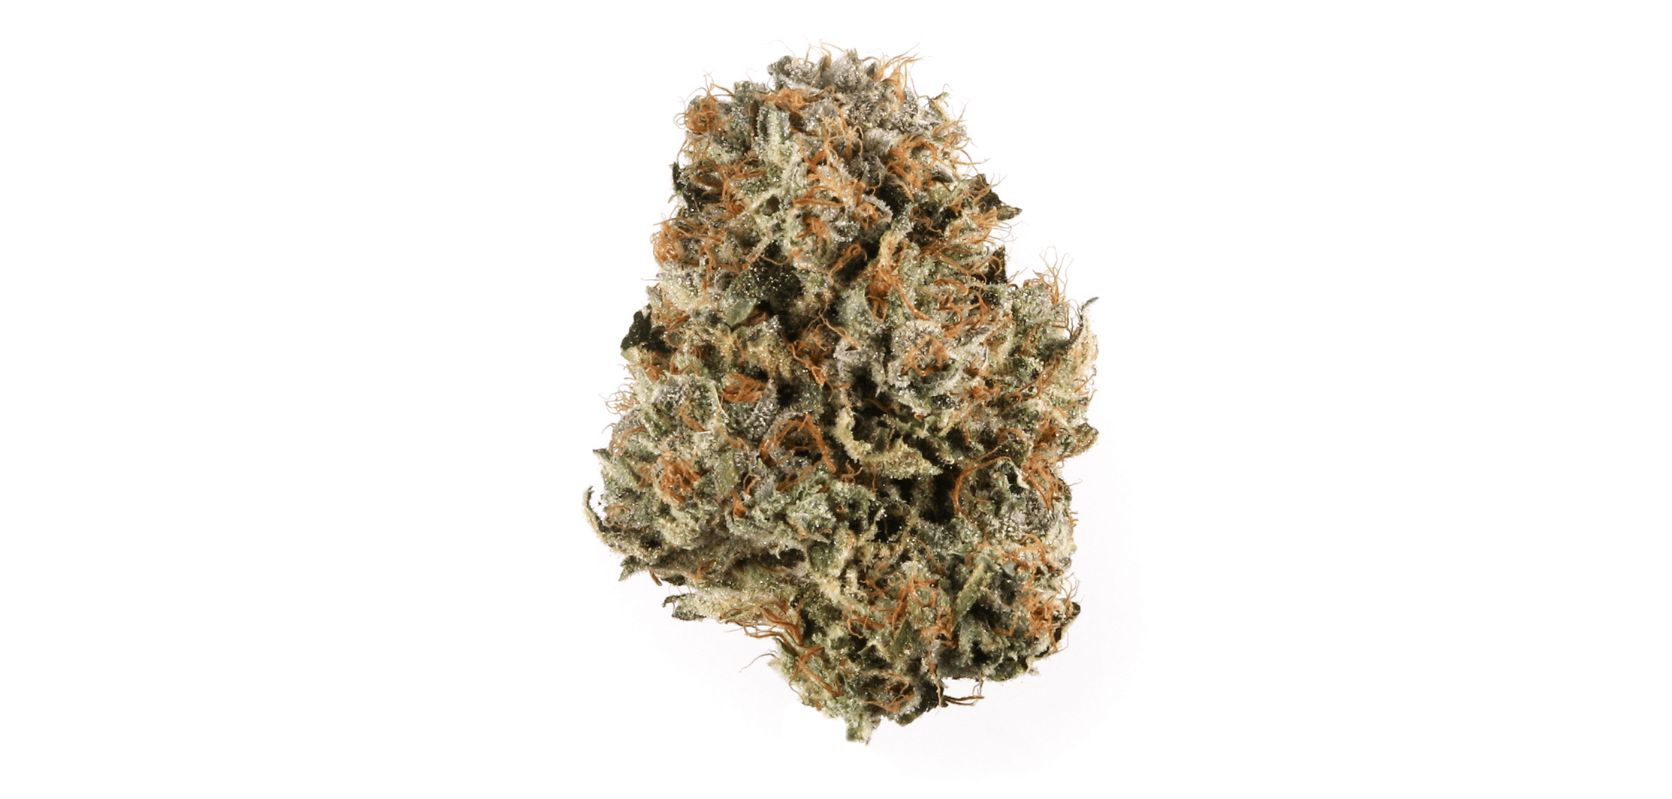 With Cali Bubba, you're not just getting a strain that's all about leisurely relaxation. Its potent Indica dominance can also offer a plethora of potential medical benefits.